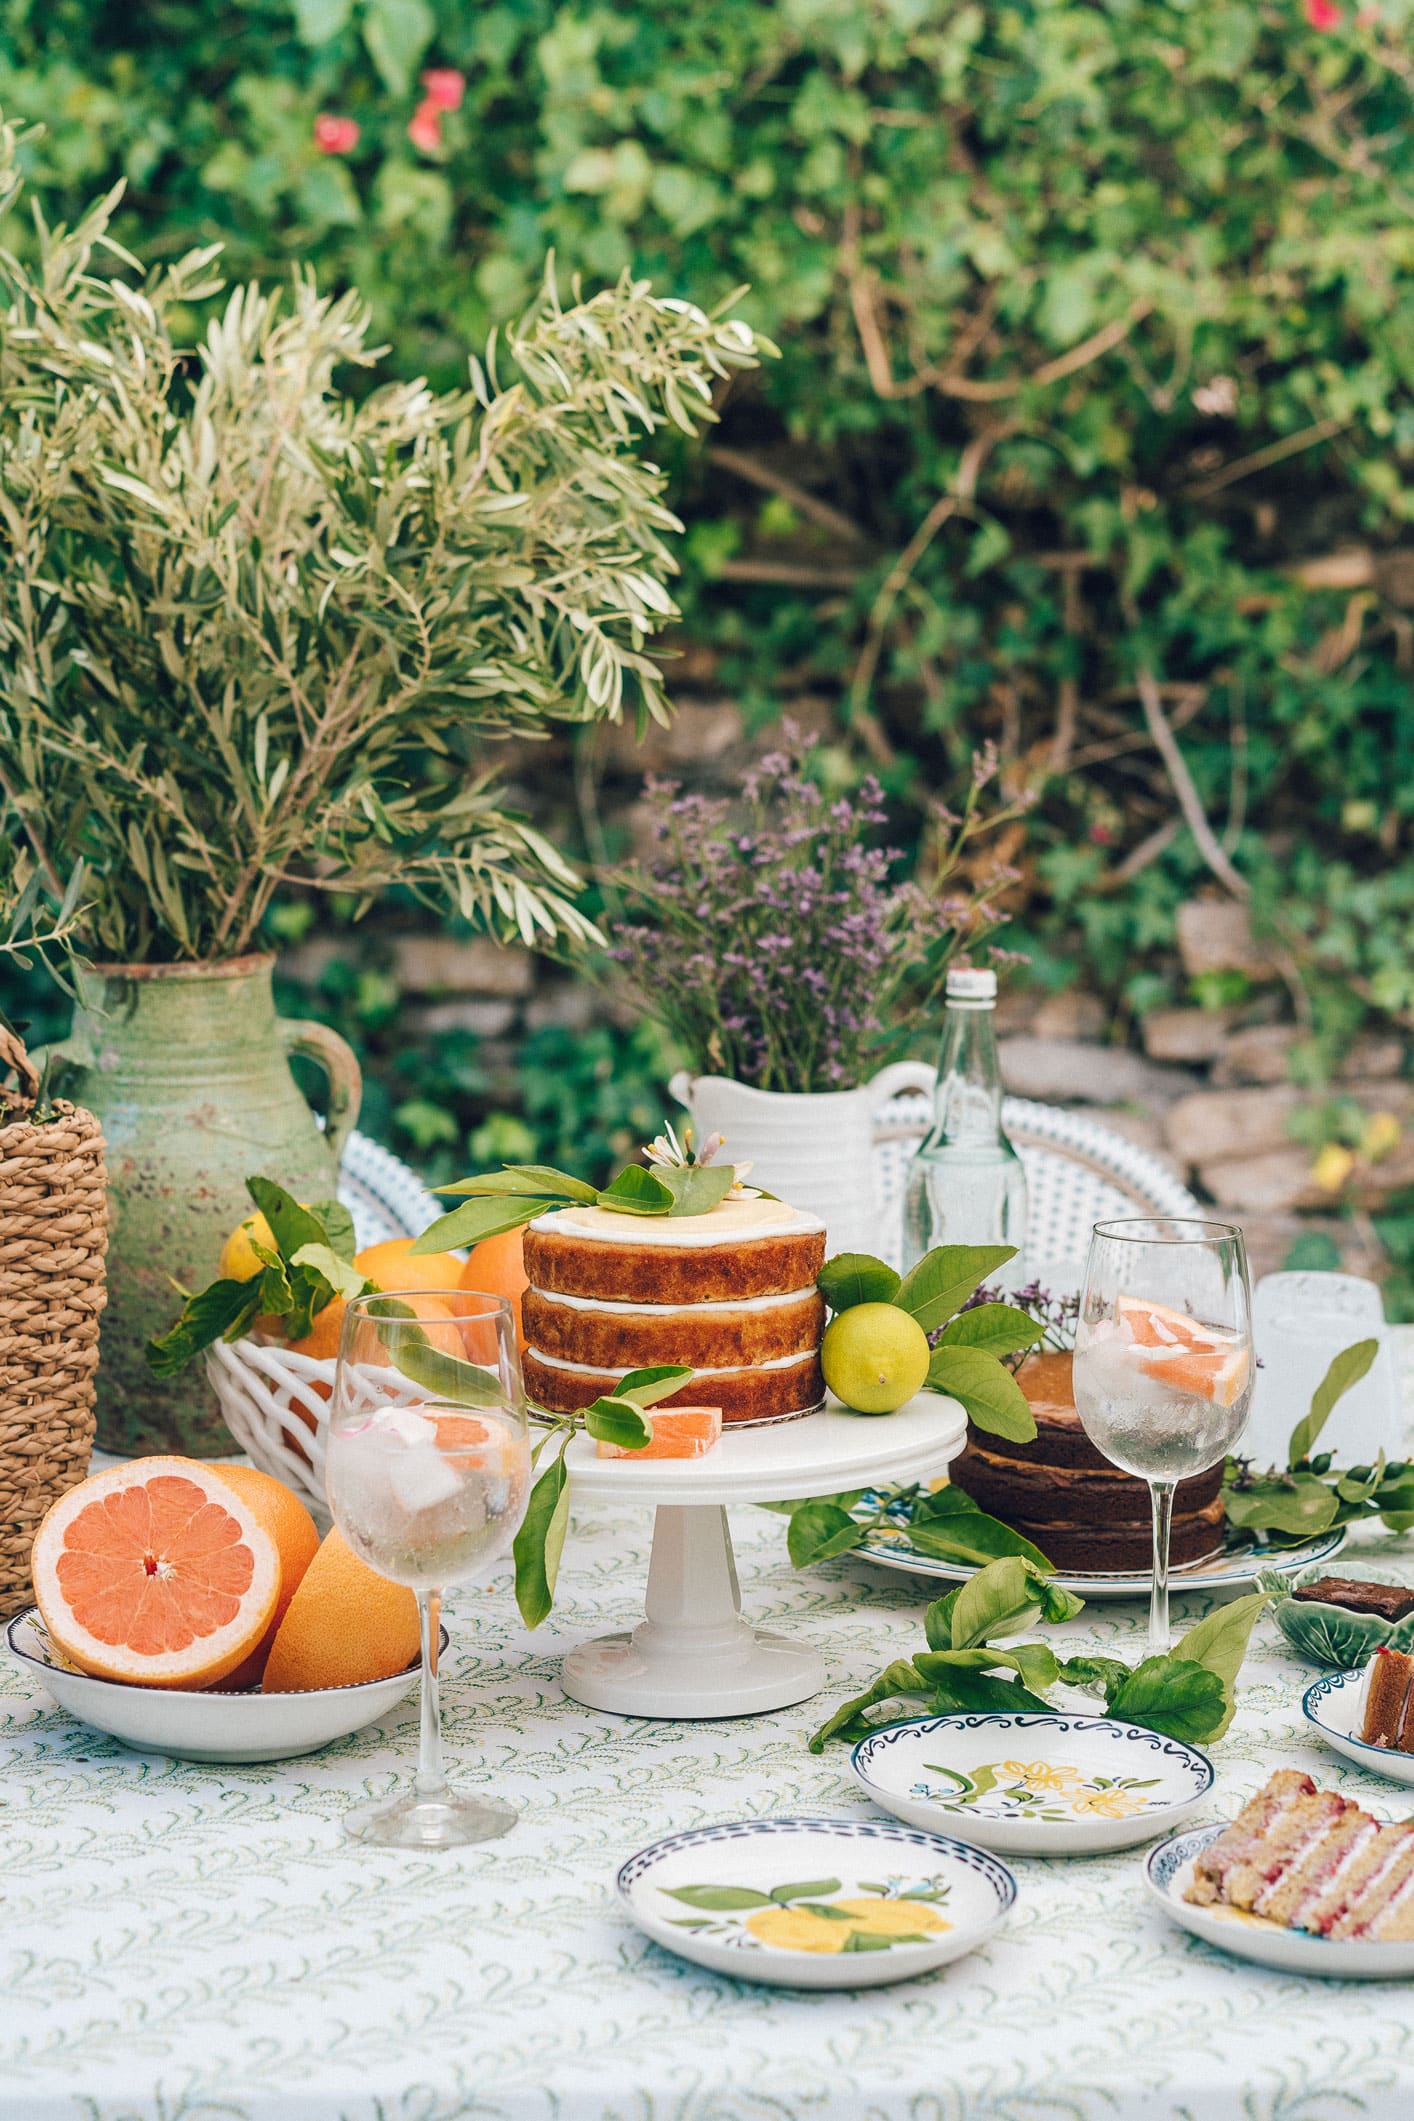 Cake and Cocktails: 3 Tips For Hosting The Perfect Summer Party